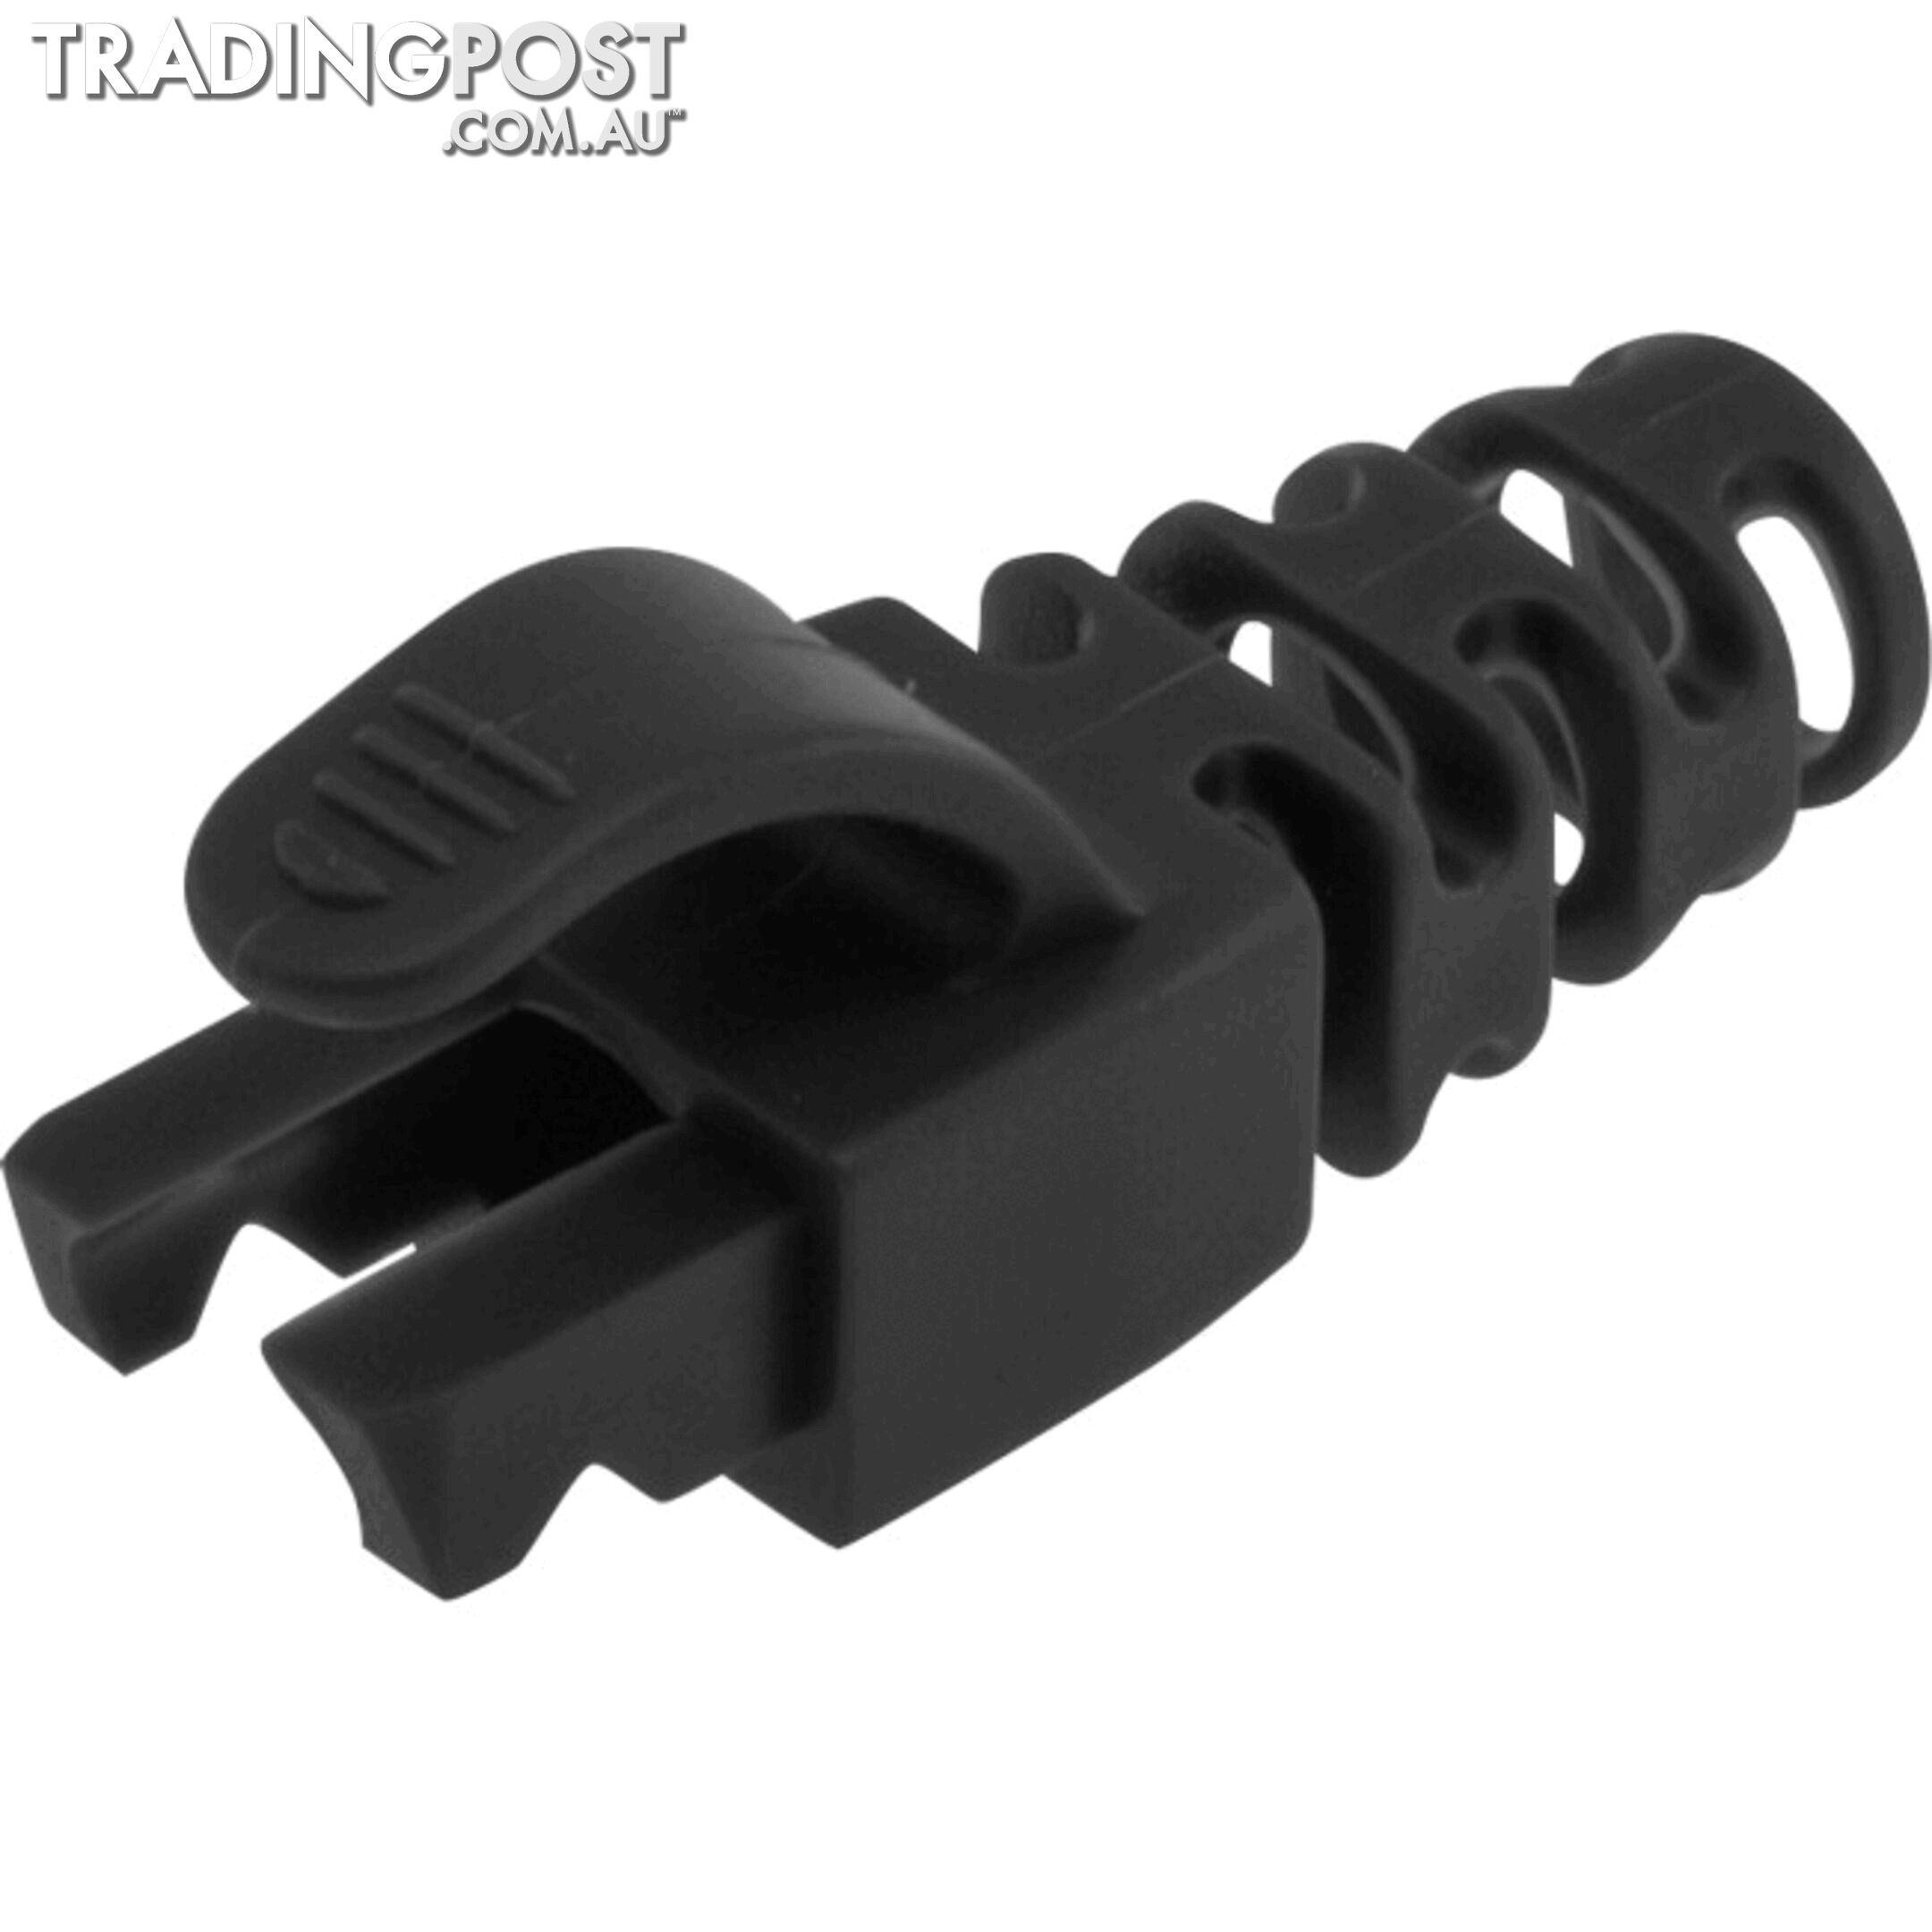 PK4015 6.5MM BLACK RJ45 RUBBER BOOT FOR CAT5E/6 STYLE A